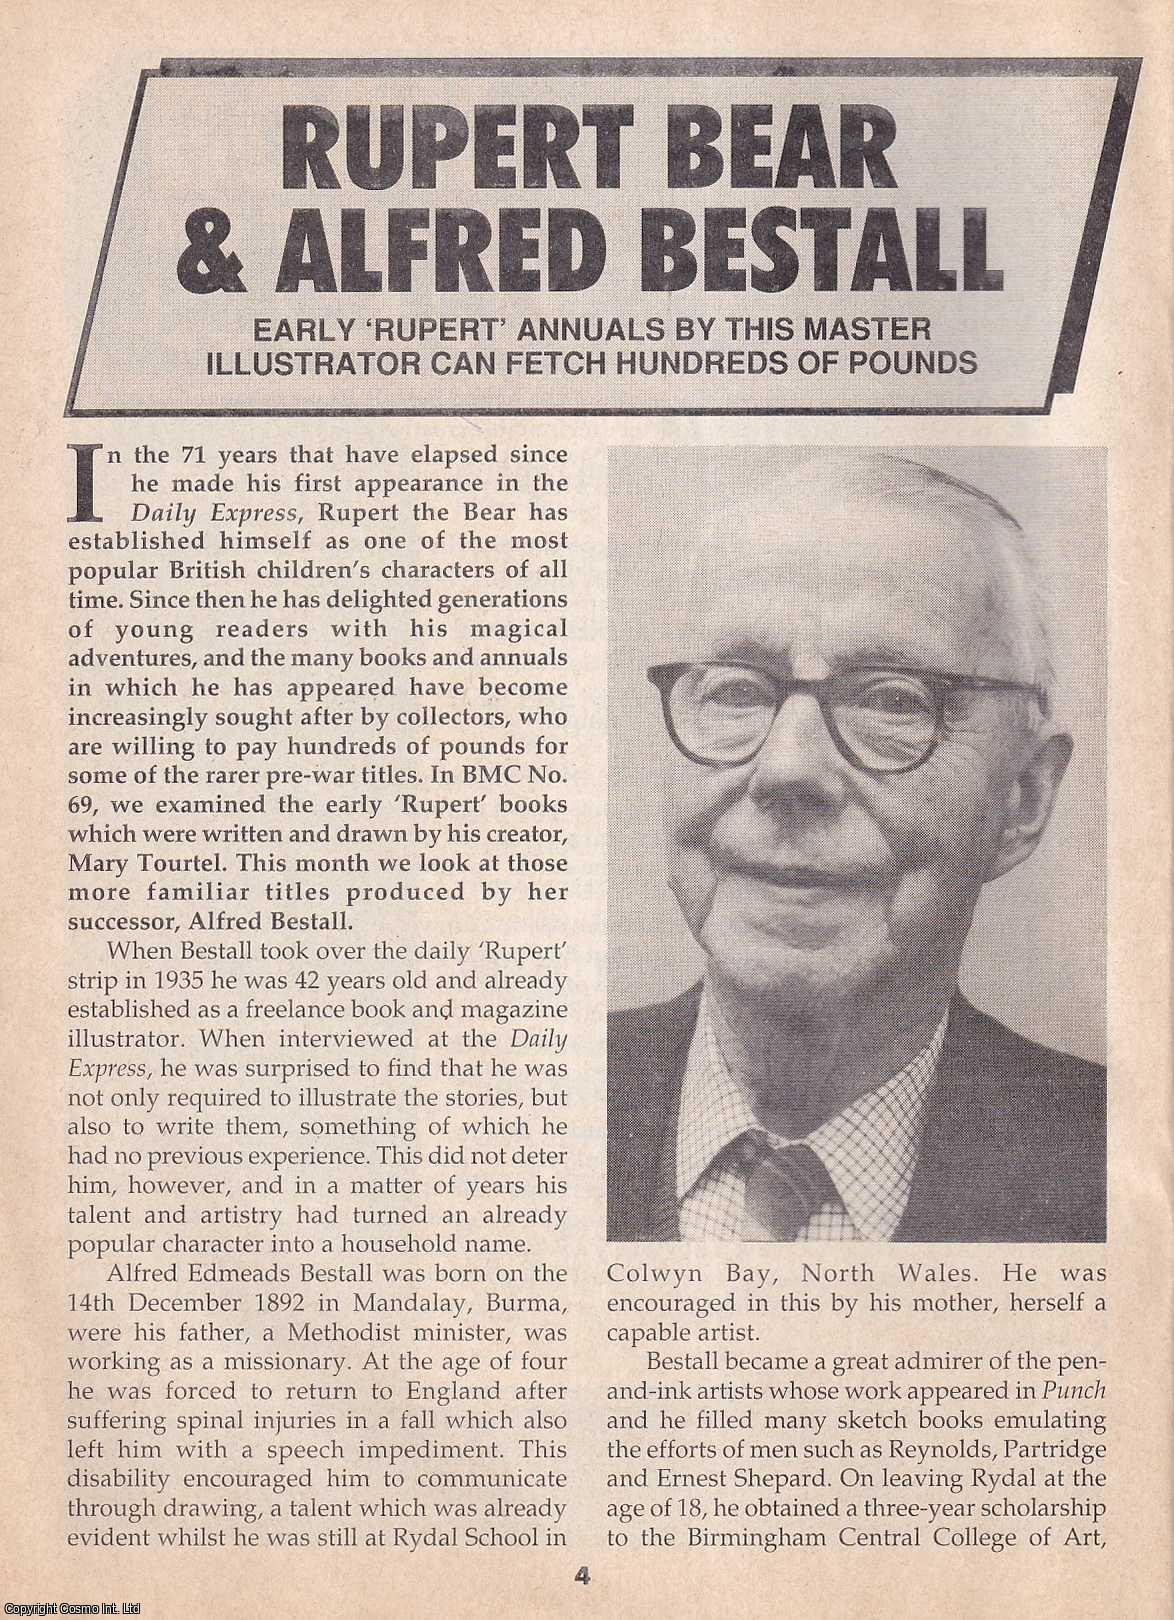 --- - Rupert Bear and Alfred Bestall. Early Rupert Annuals. This is an original article separated from an issue of The Book & Magazine Collector publication.